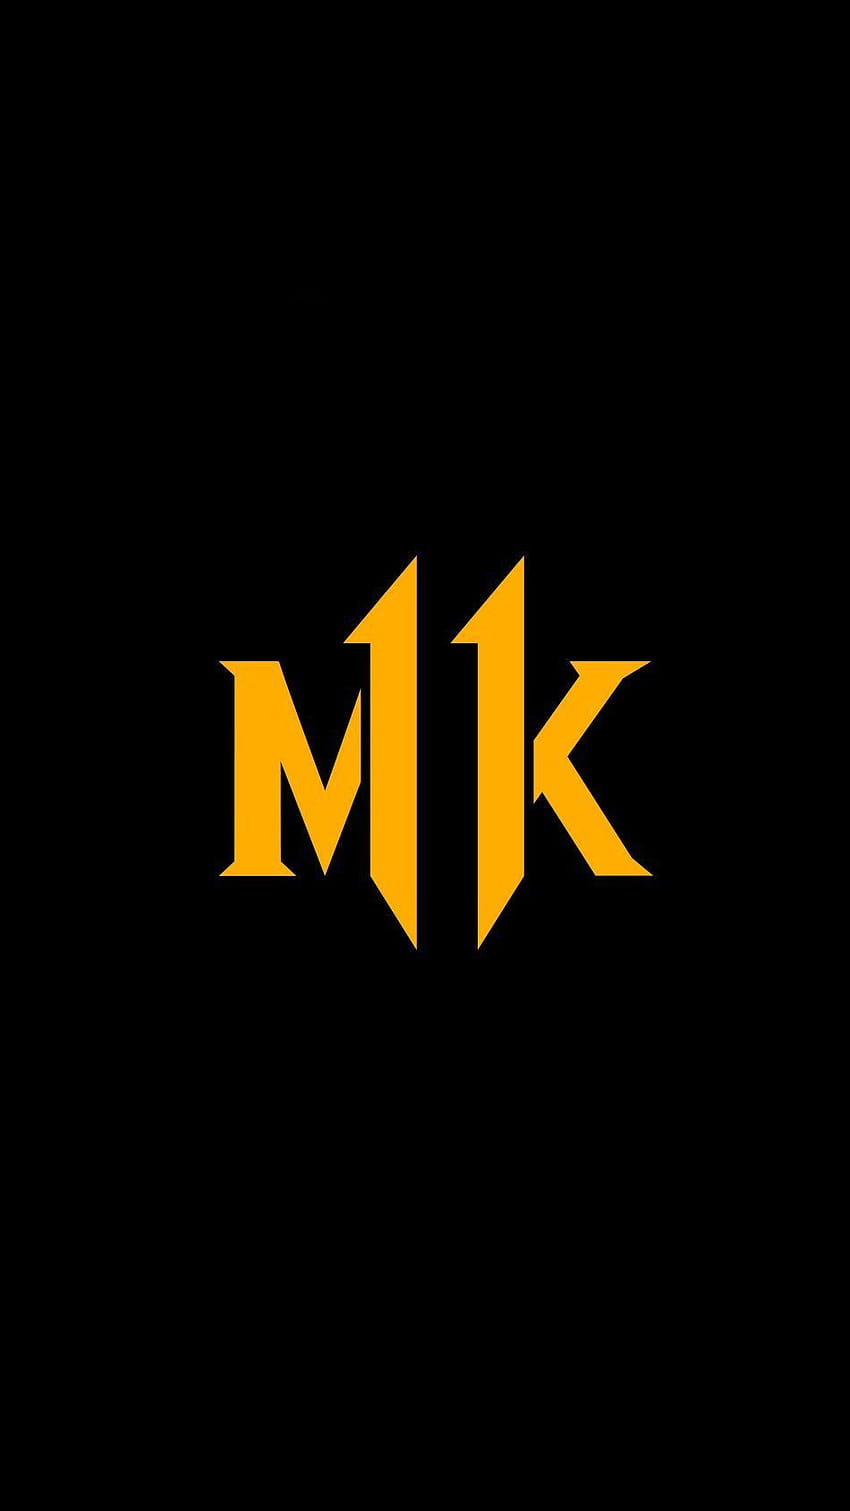 Km logo design initial letter Royalty Free Vector Image